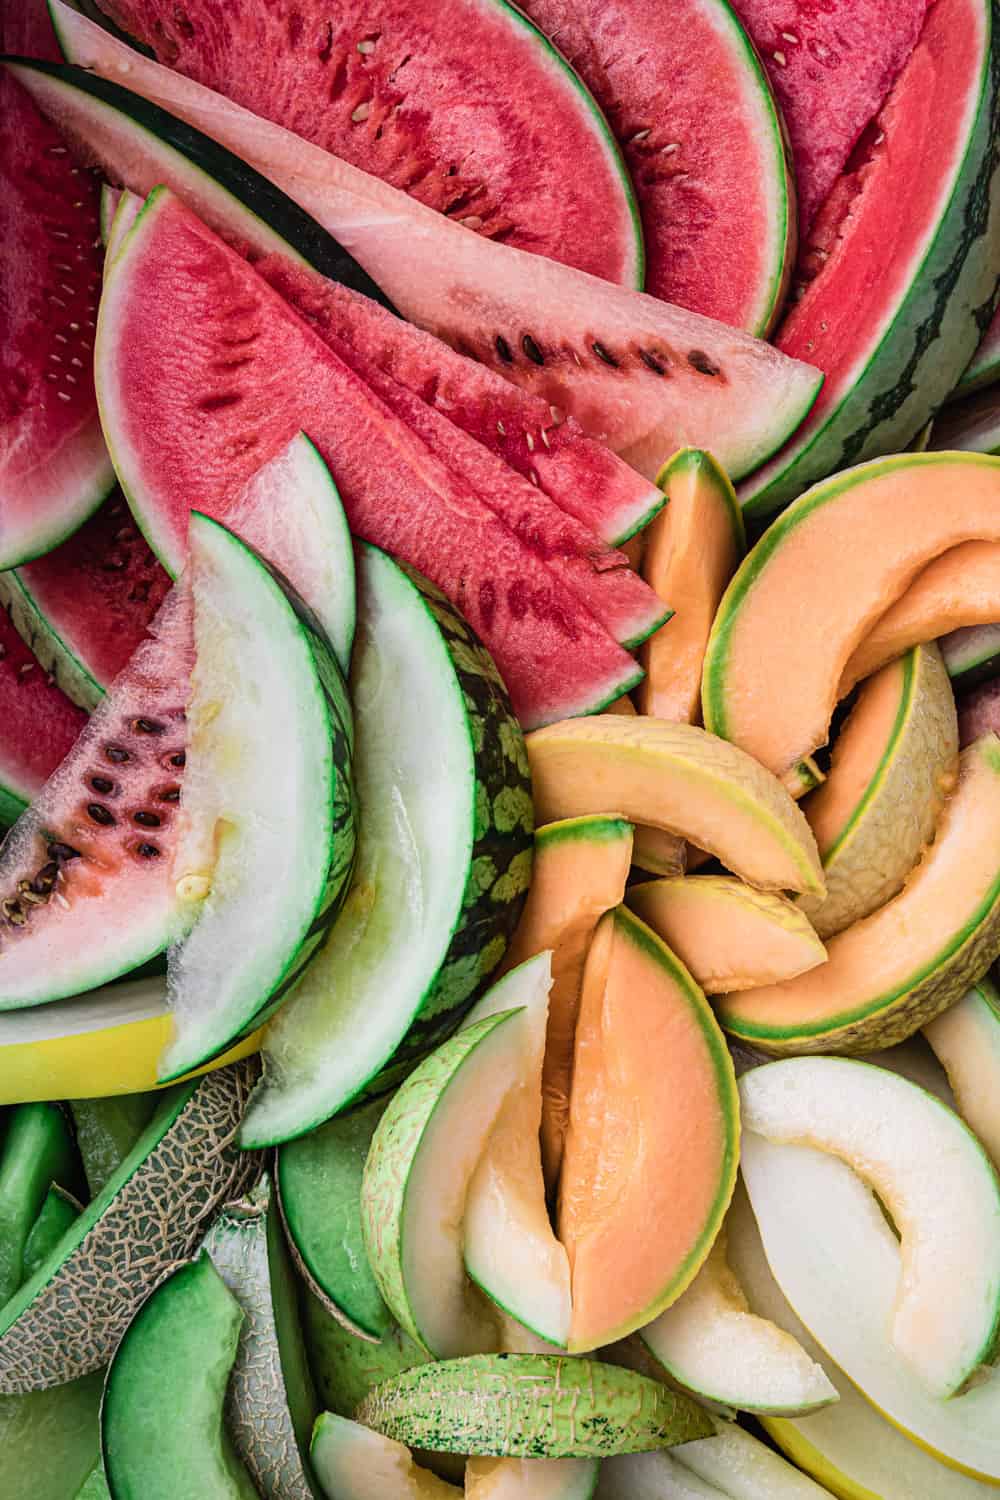 red, pink, orange, white and green melon slices